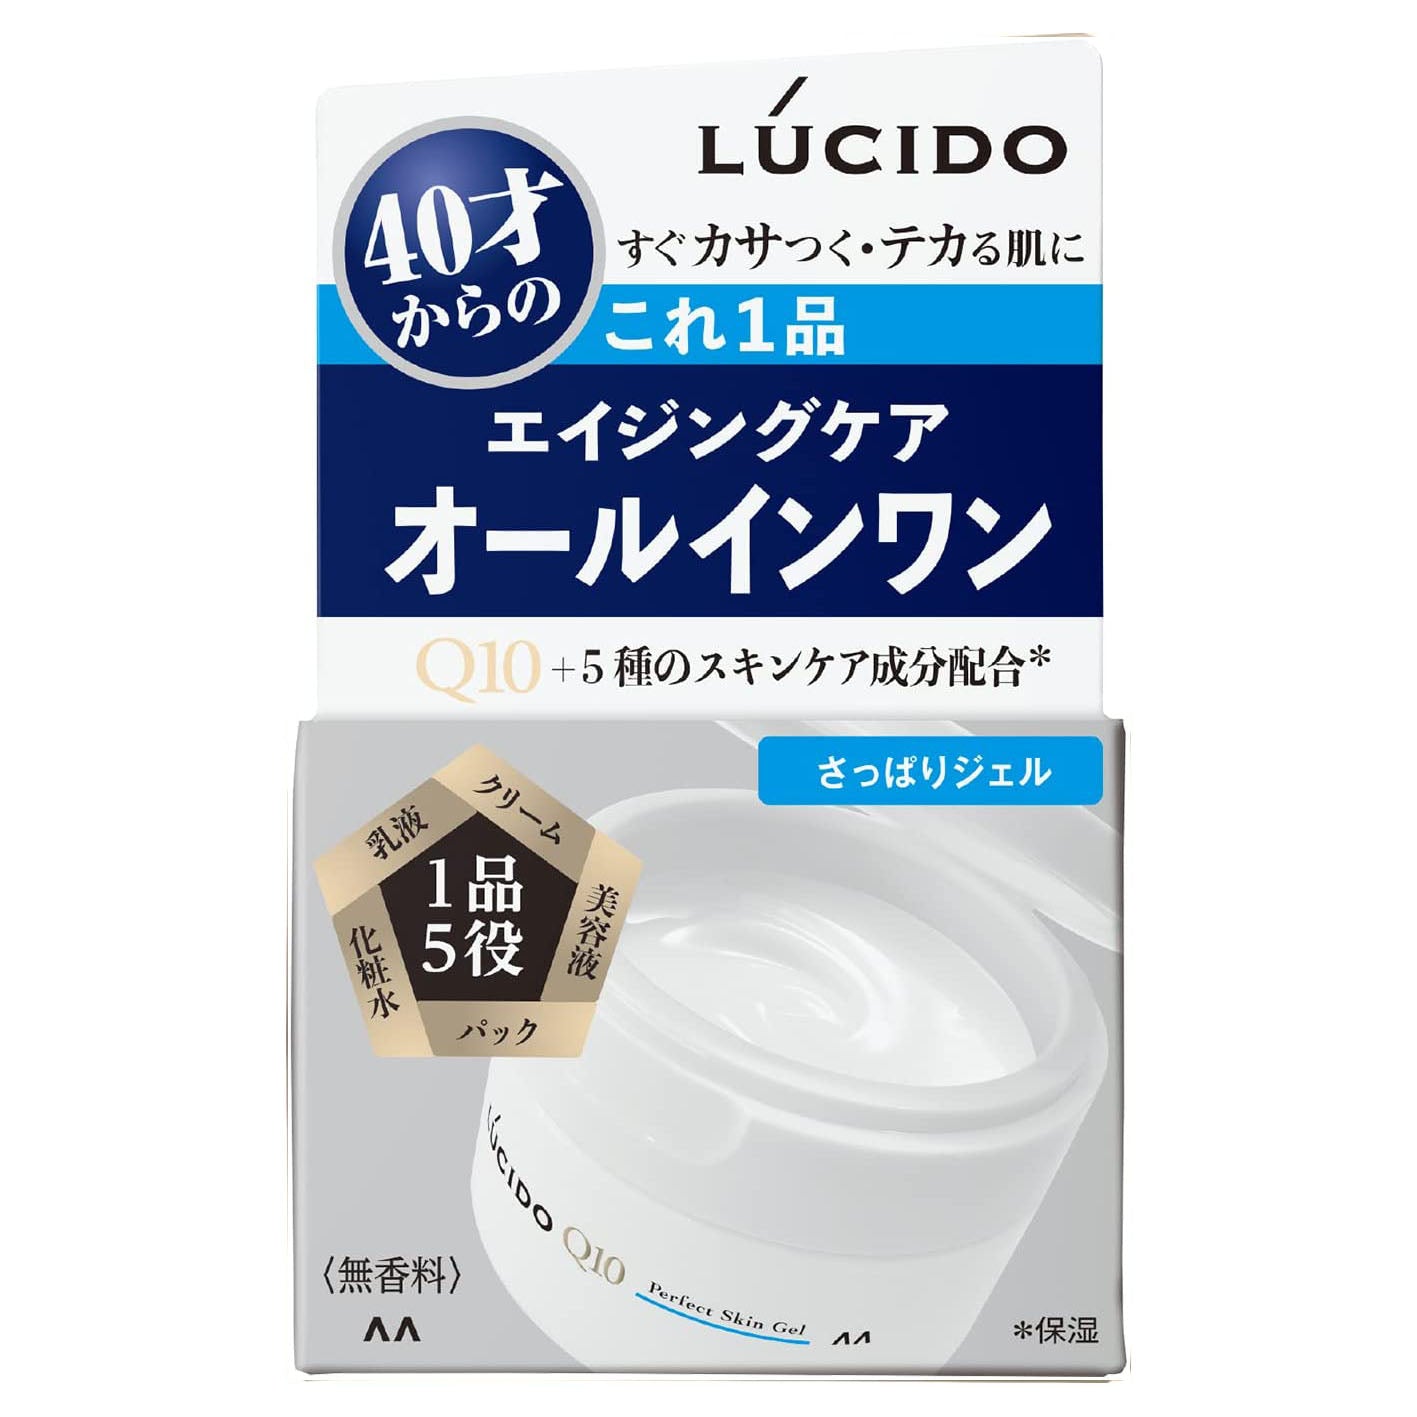 Lucido Perfect Skin Gel 90g - Harajuku Culture Japan - Japanease Products Store Beauty and Stationery